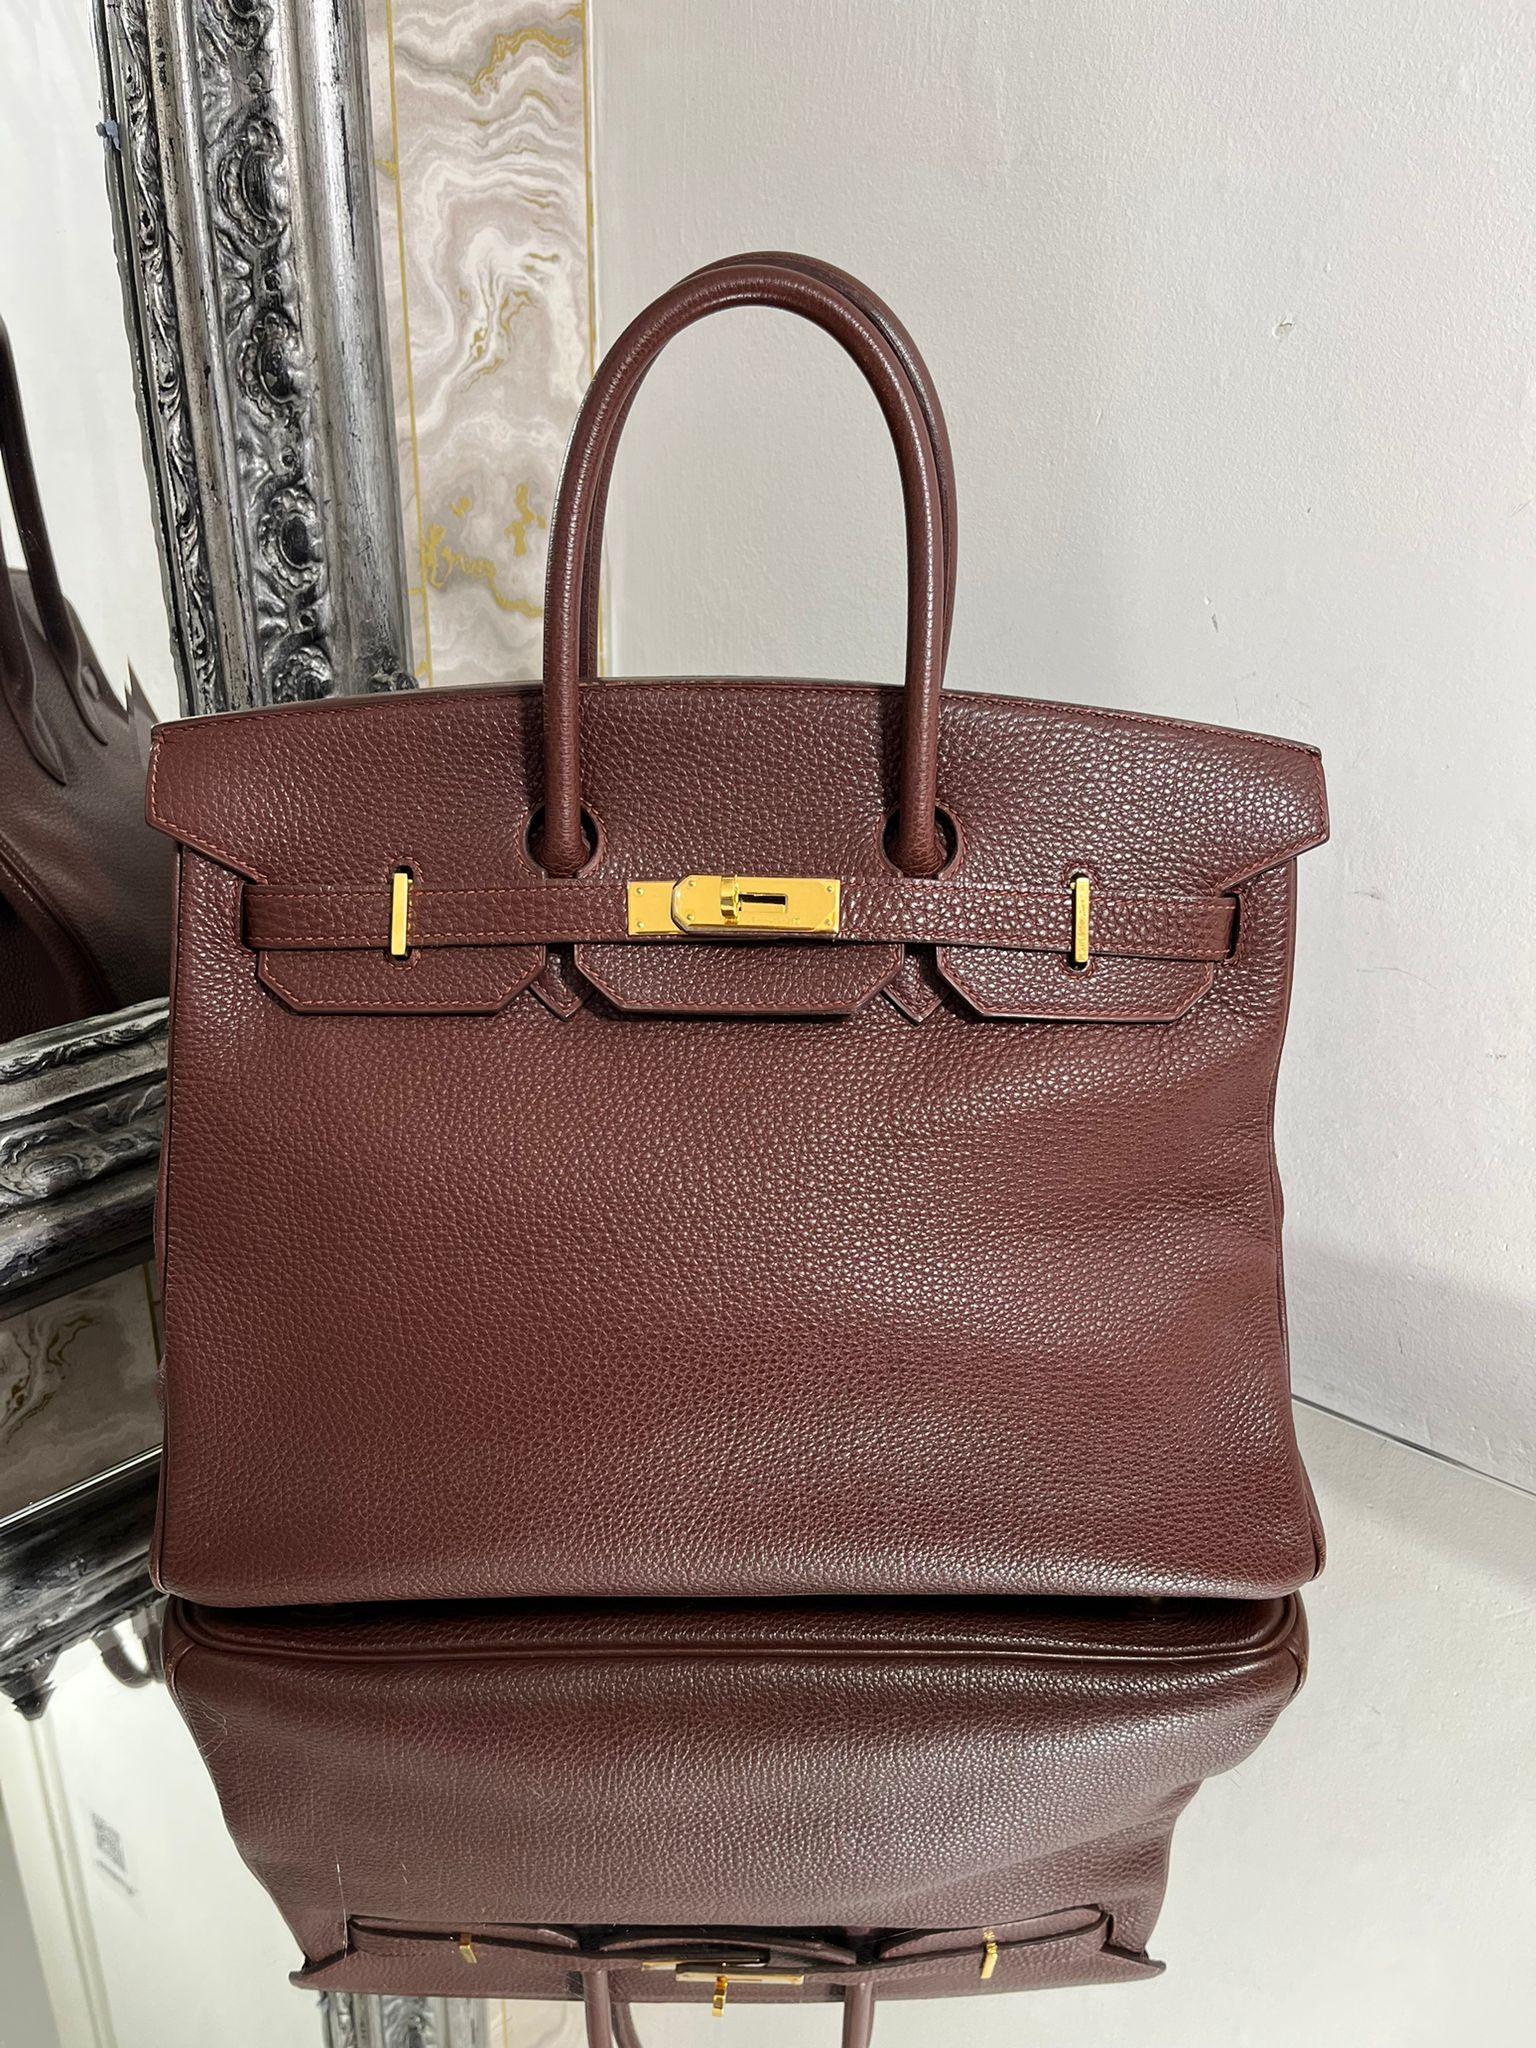 Hermes Birkin 35cm

From 2001 is this Havane a warm brown colour in Togo leather, 

with gold plated hardware.  Twist lock closure and rolled leather carry handles.

Size - Height 28cm, Width 35cm, Depth 18cm

Condition - Vintage - Good Condition (